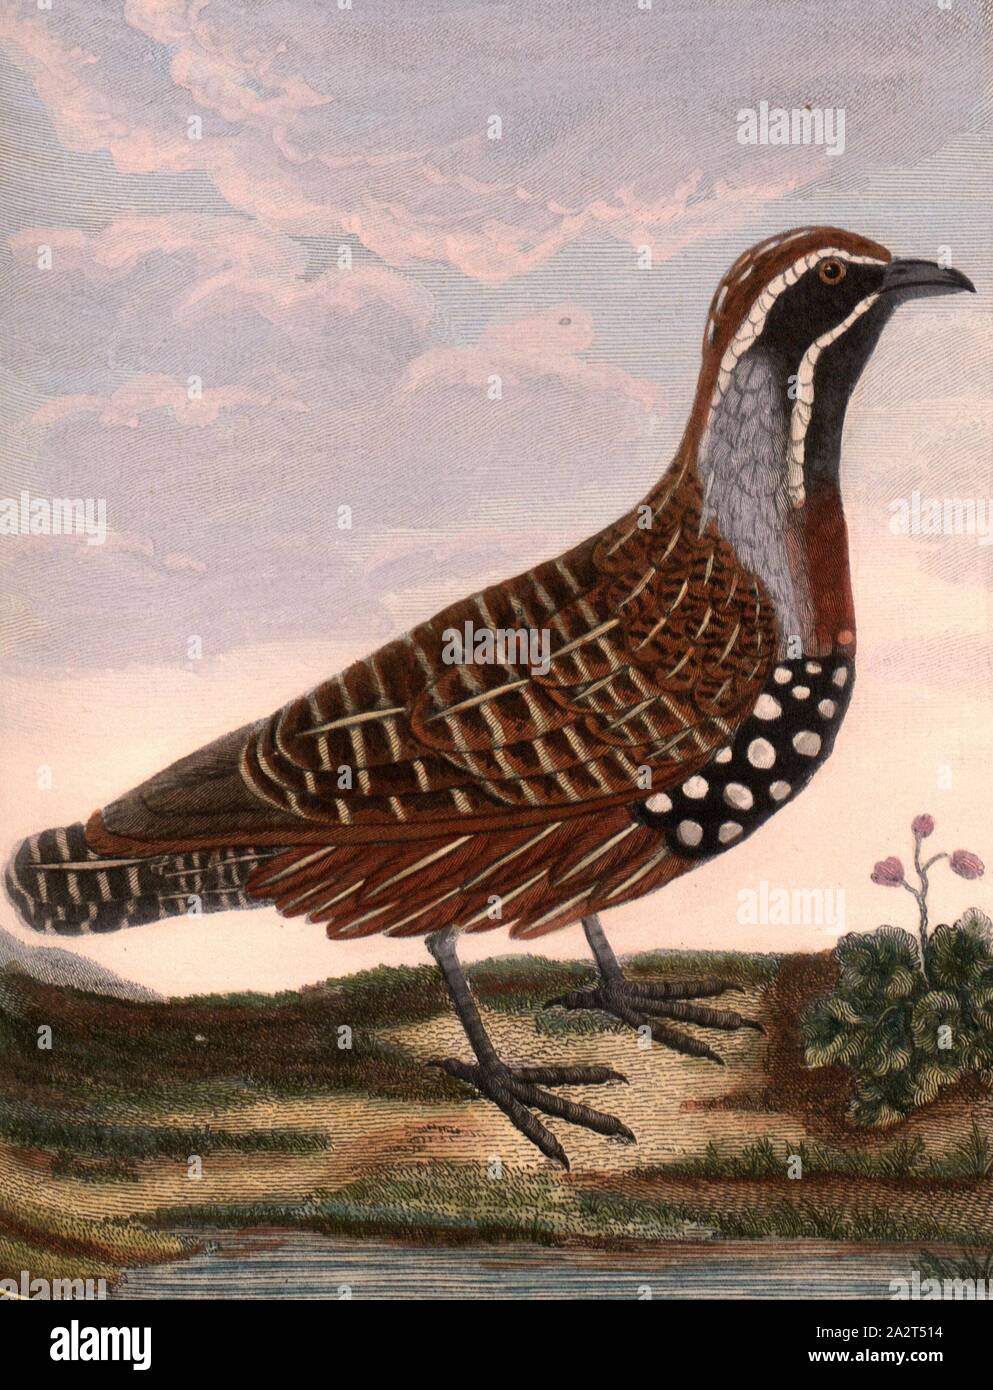 Great quail from Madagascar, Great quail from Madagascar, twice the size of the European quail, Signed: P. Sonnerat pinx, J.J. Avril sculp, Pl. 98, before p. 171 (vol. 2), Sonnerat, Pierre M. (pinx.); Avril, J. J. (sculp.), 1782, Sonnerat, Pierre Stock Photo